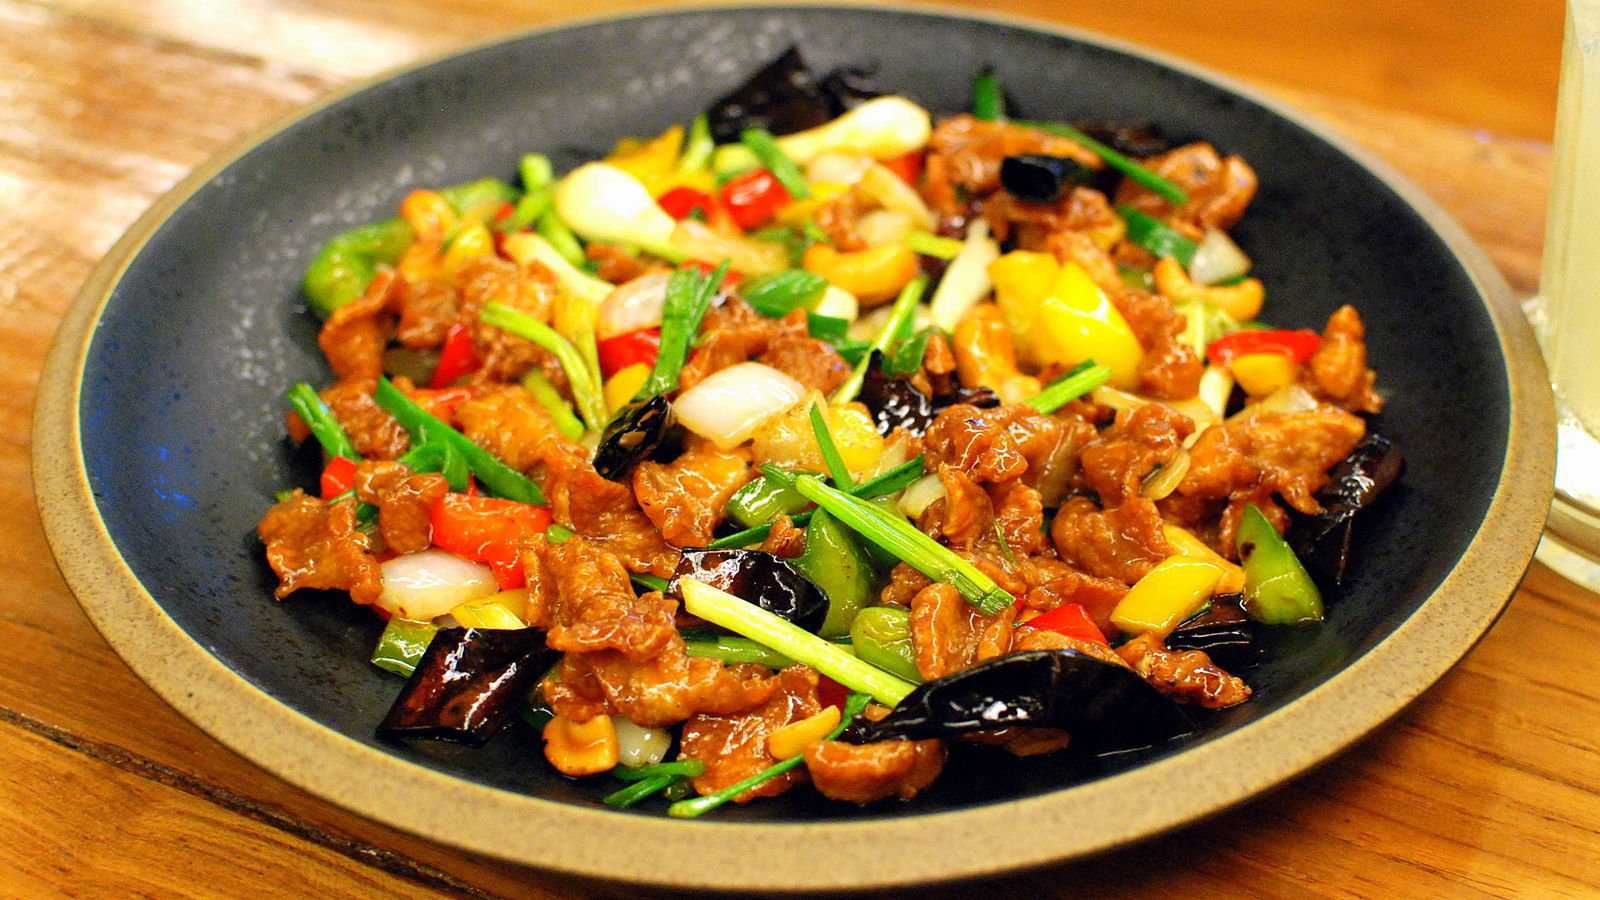 Chicken with cashew nuts is one of the milder dishes from Thailand that is now popular worldwide